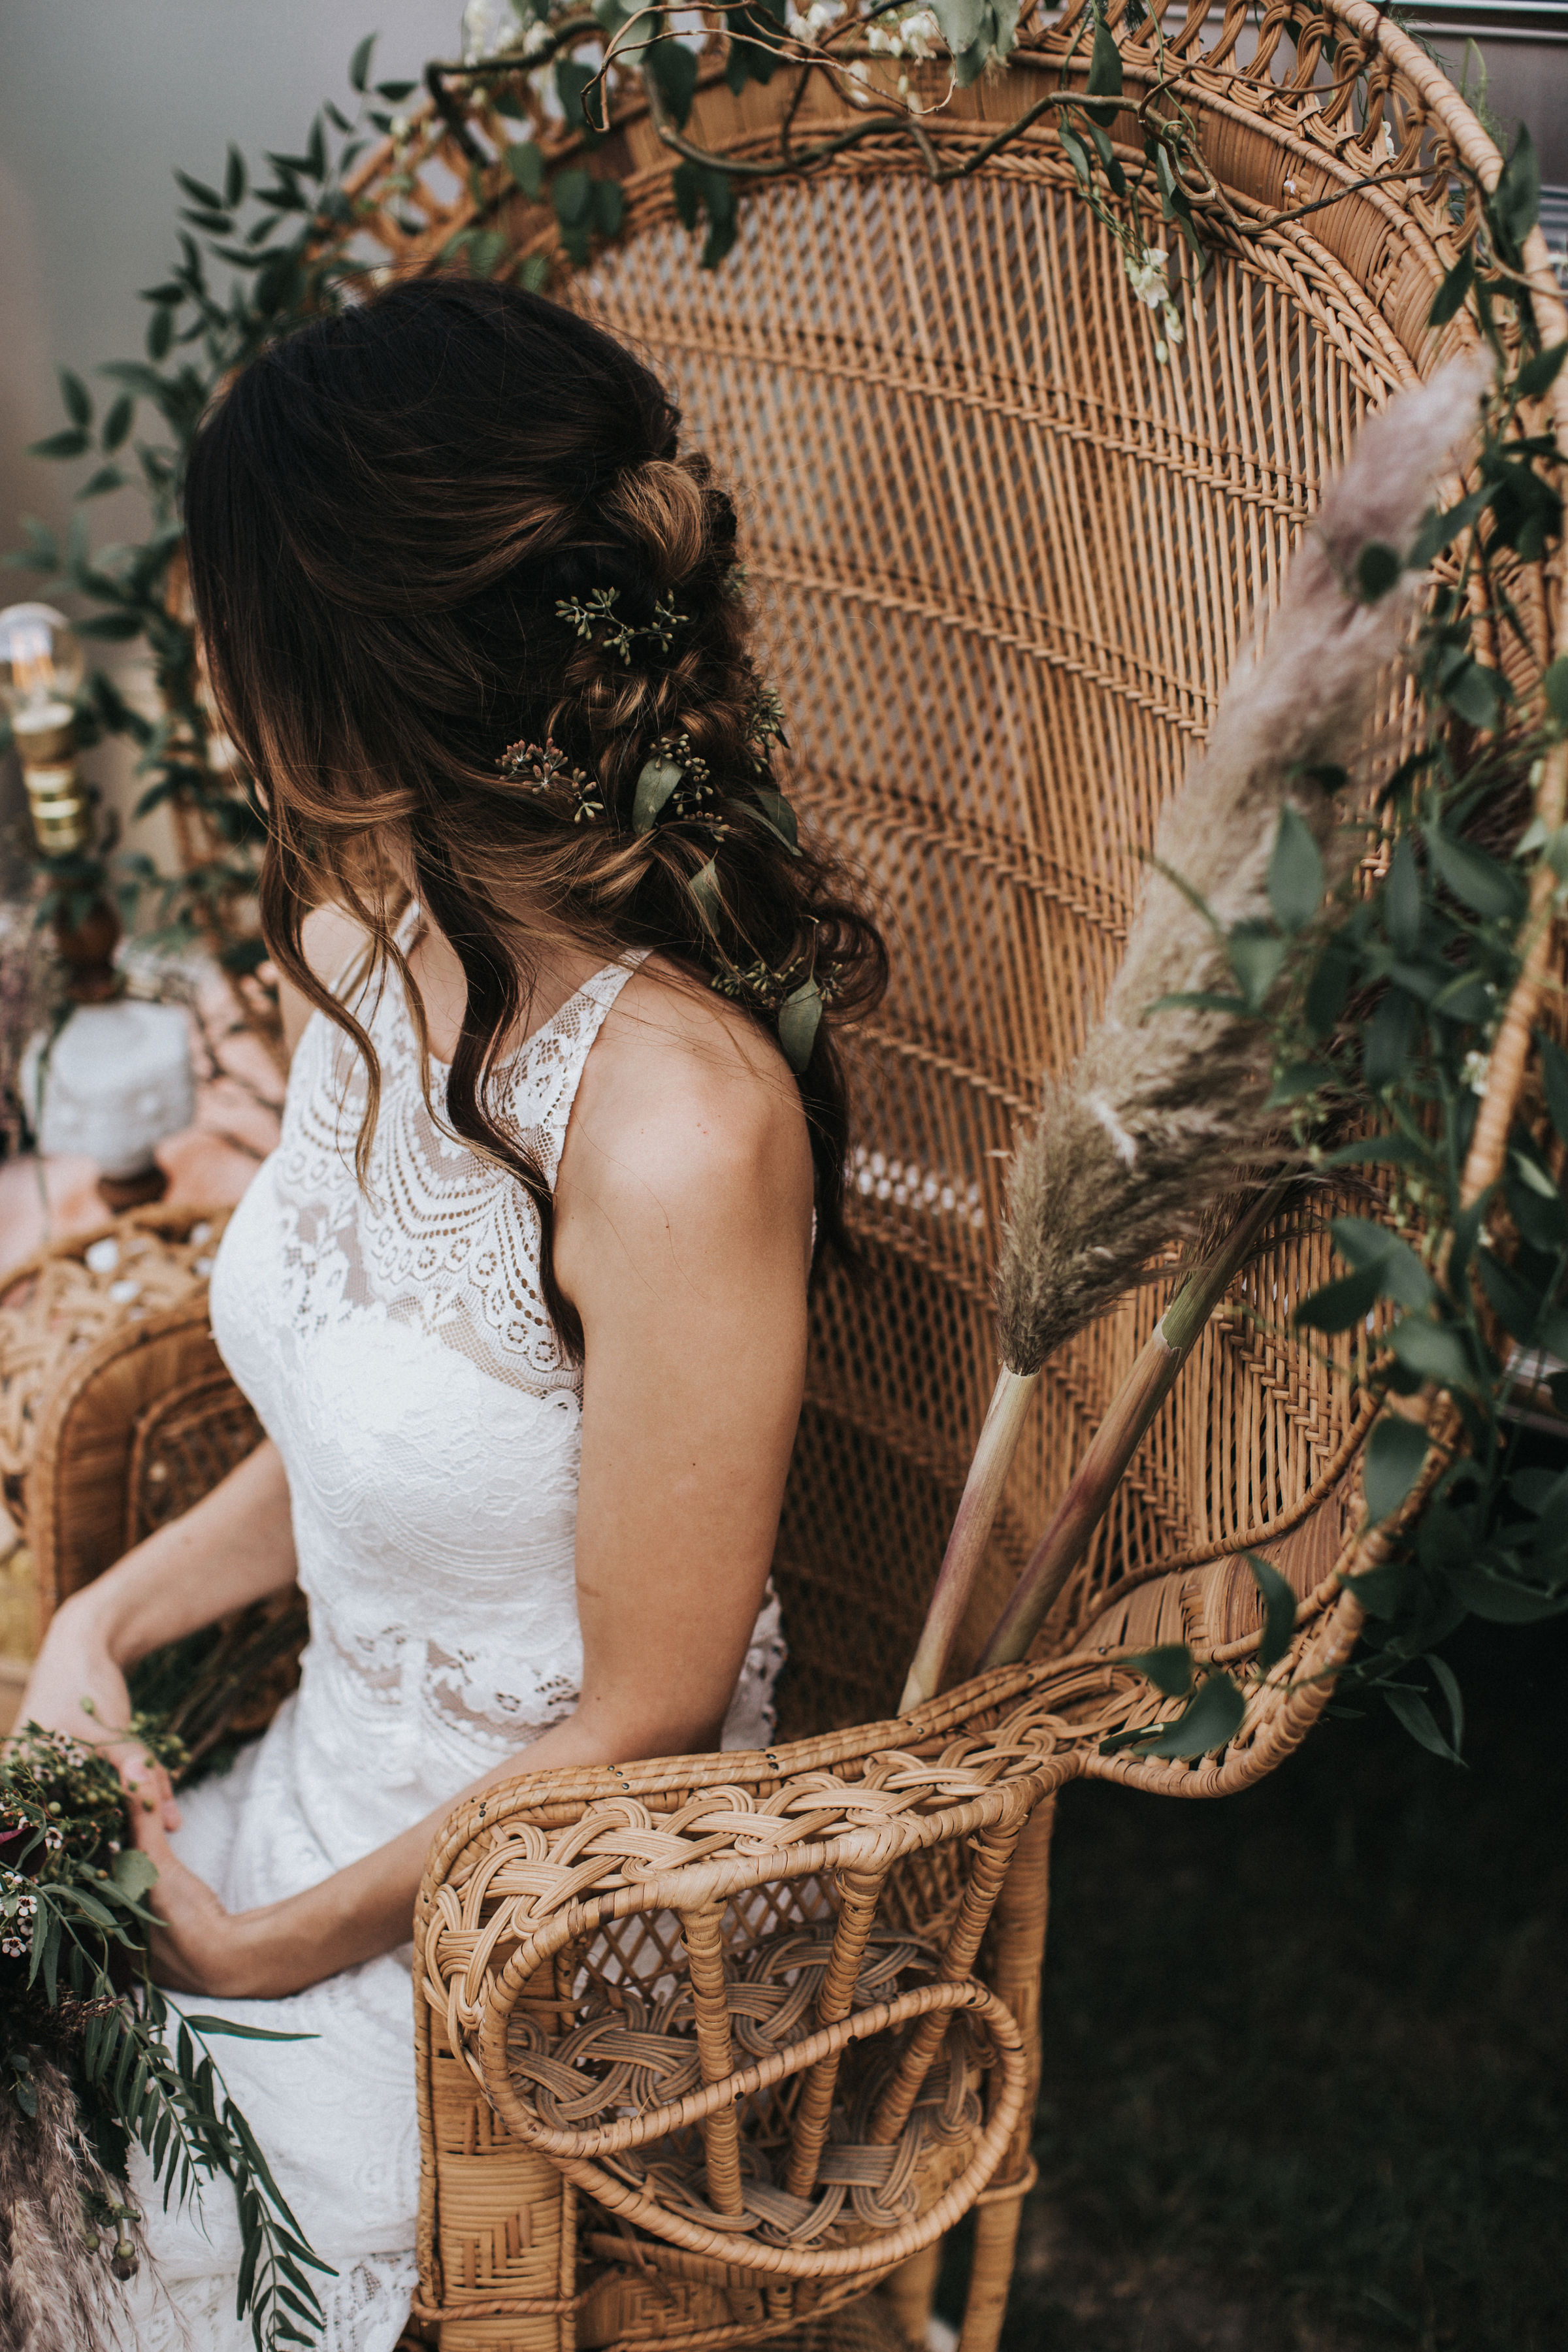 Outdoor bohemian wedding inspiration planned by Boho Blush and captured by Meg Adamek Creative. See more boho wedding inspiration at CHItheeWED.com!